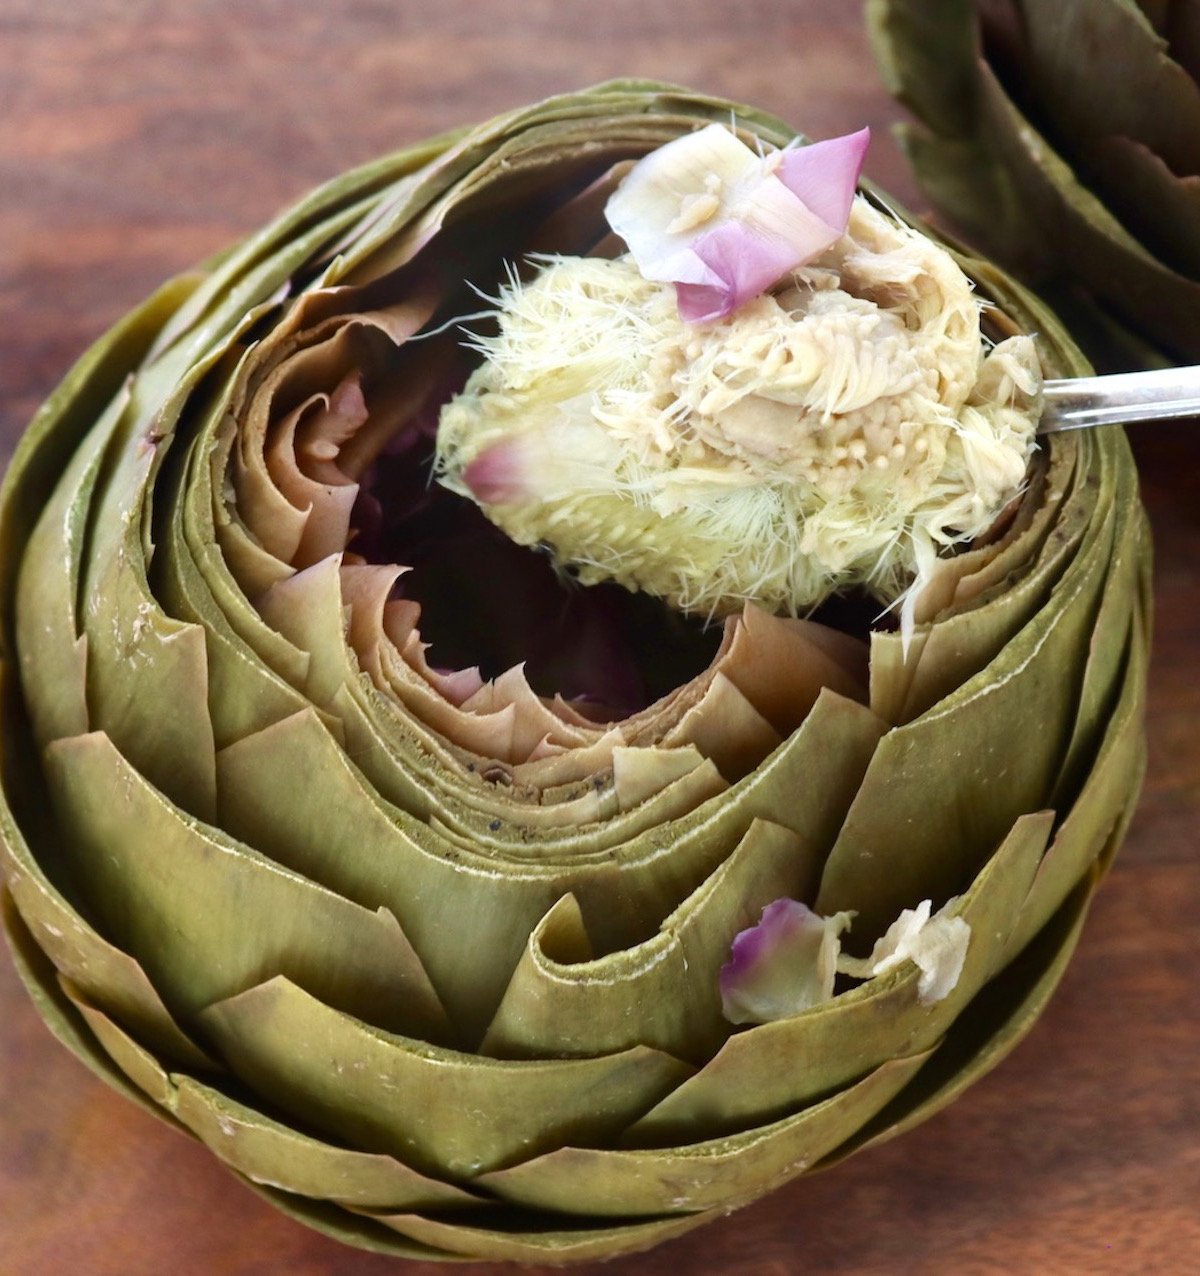 Top view of a steamed artichoke with a spoon holding up the choke that's been removed from the inside.